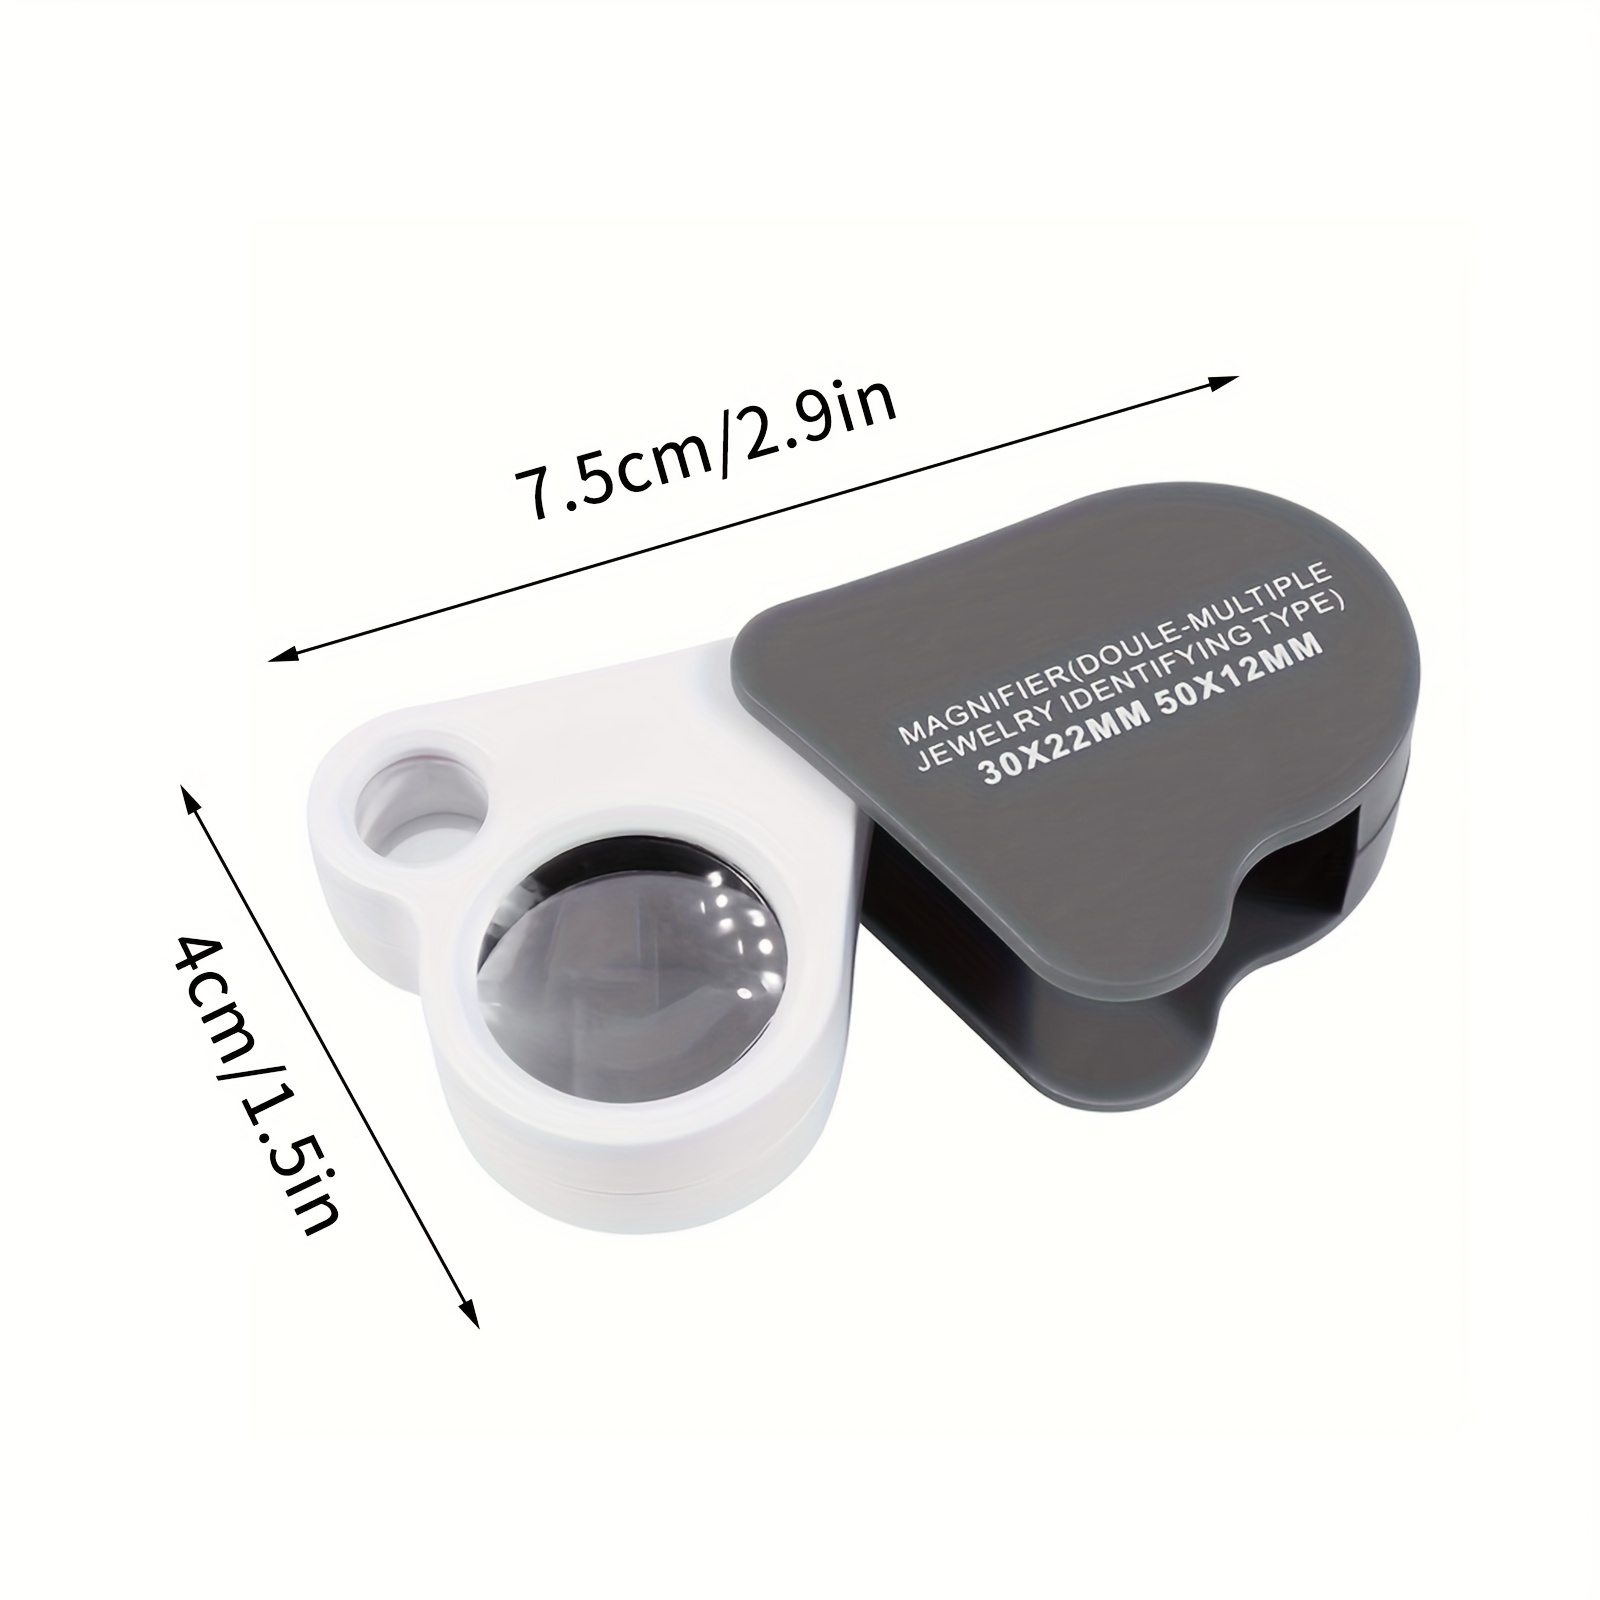 Best Jewelry Loupe Magnifier Review - Jewelers Magnifying Glass